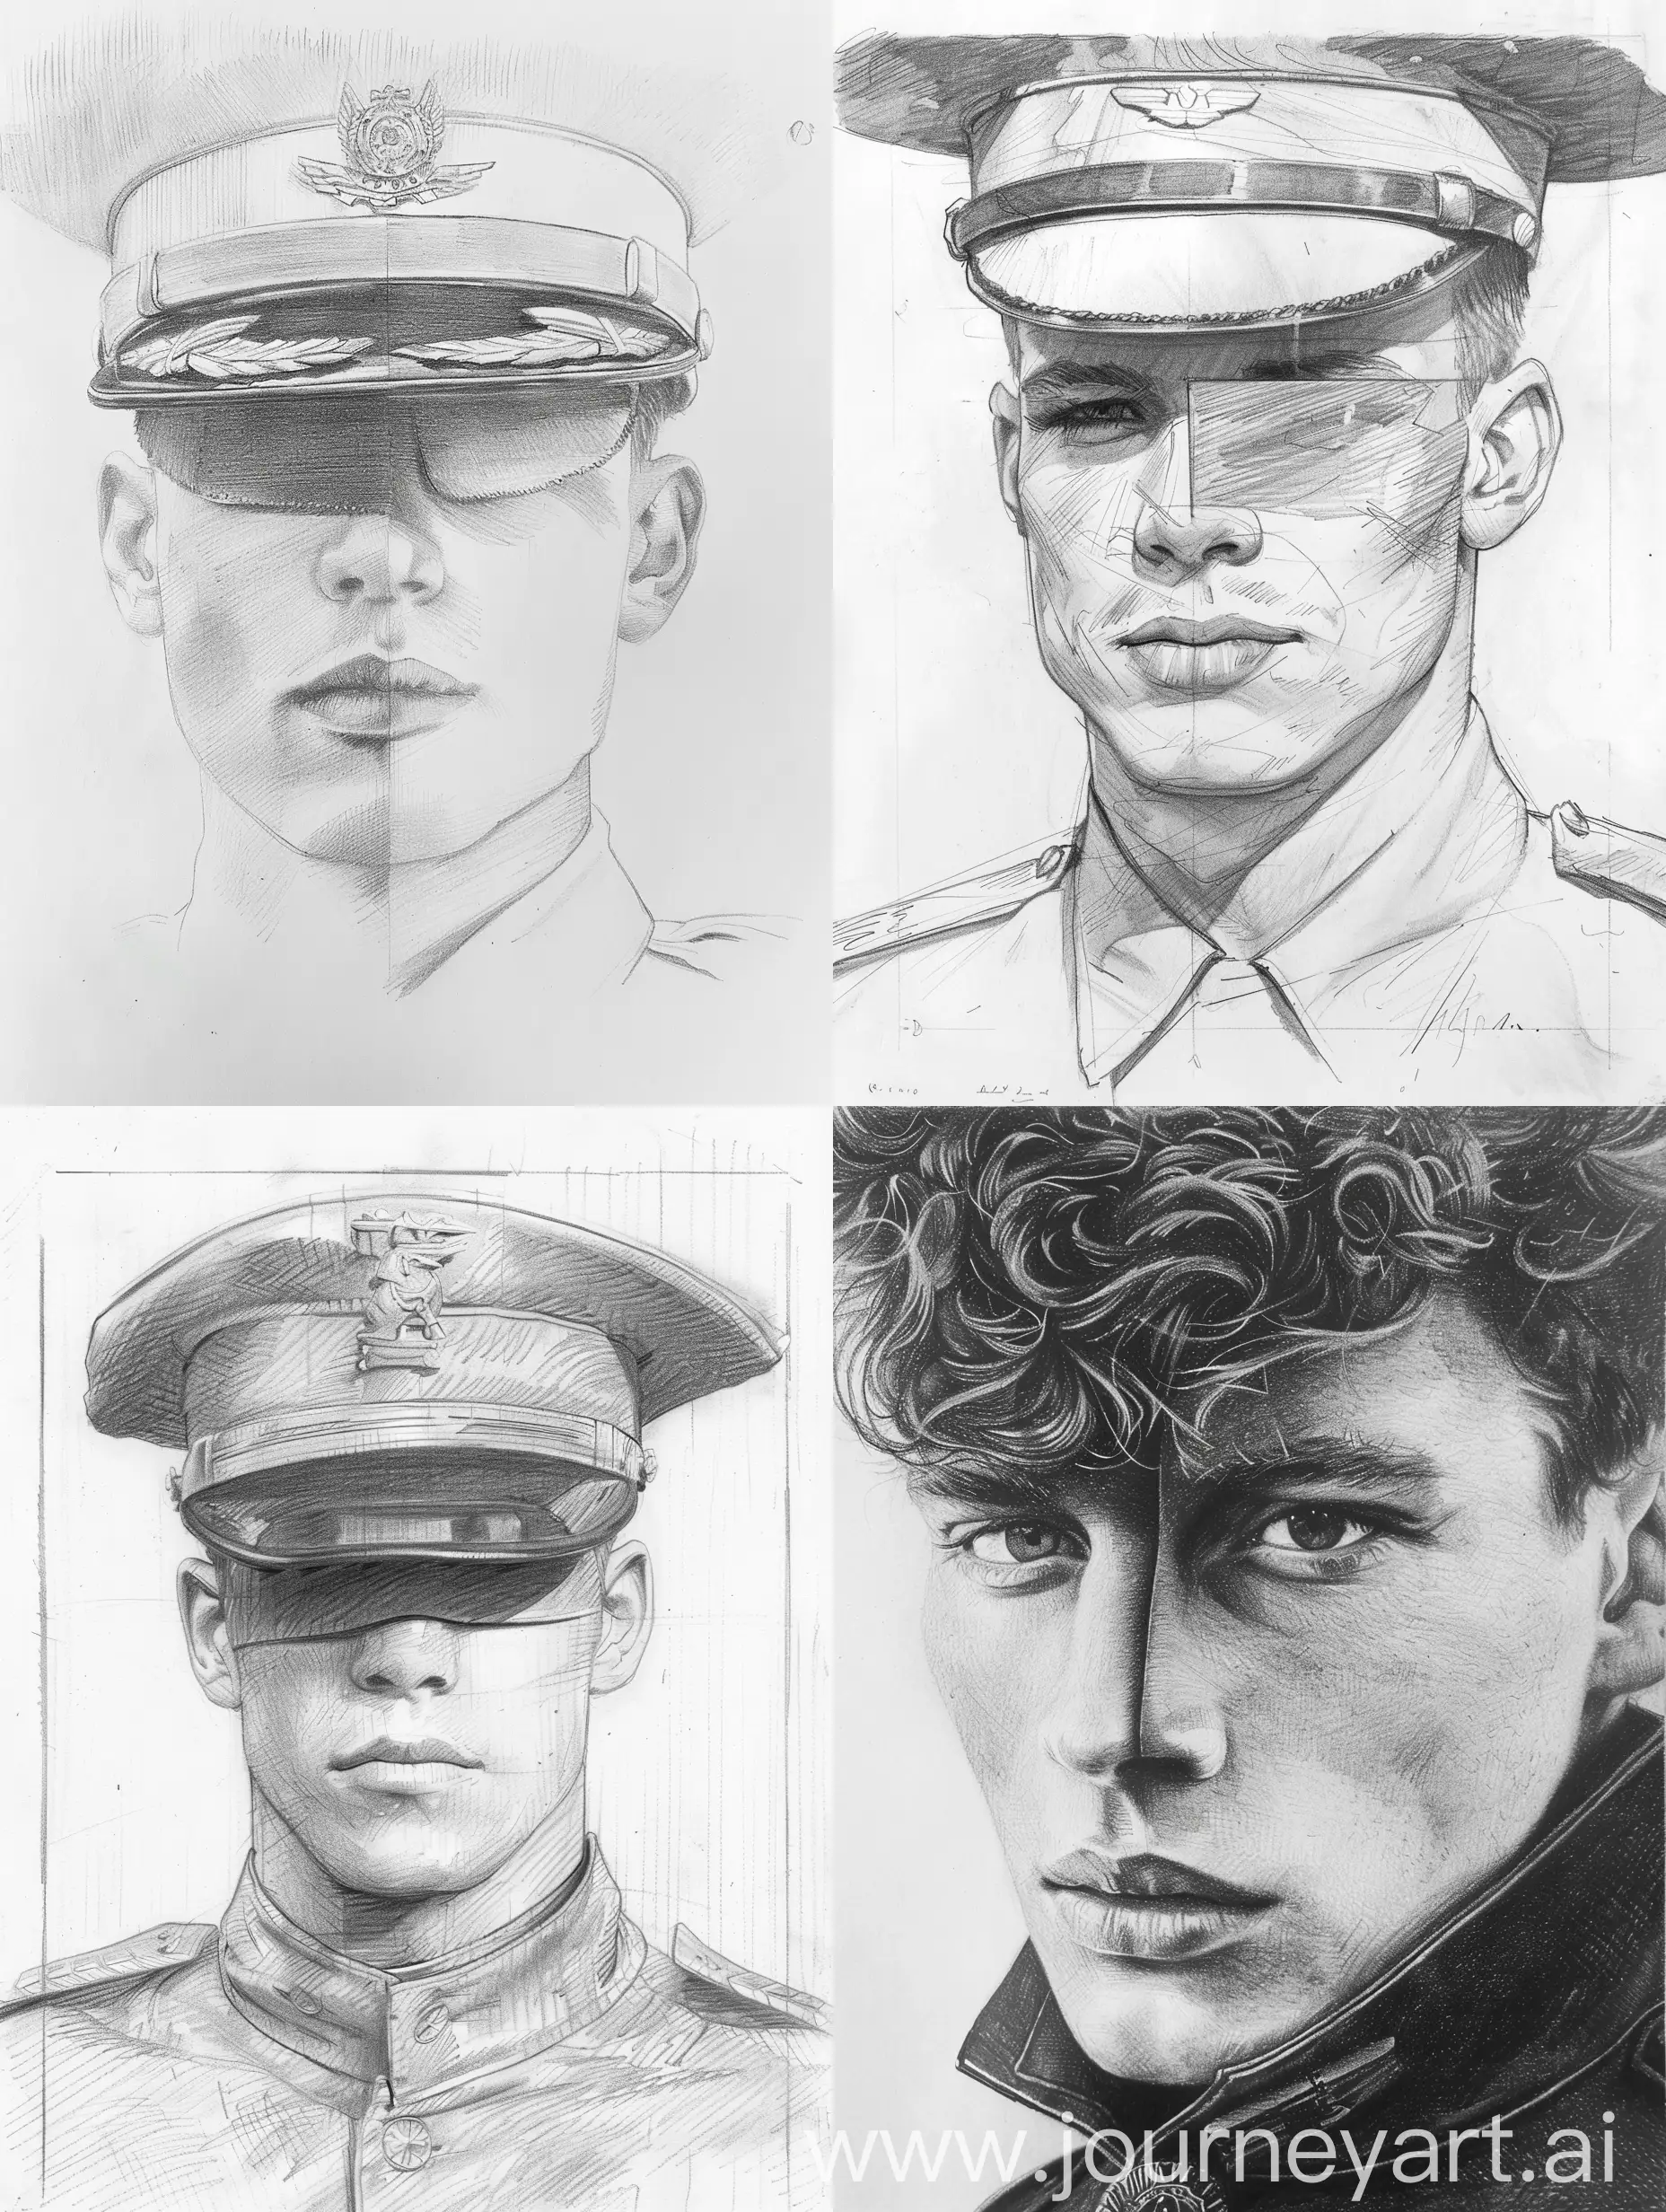 pencil drawing,handsome cadet with his eyes censored

